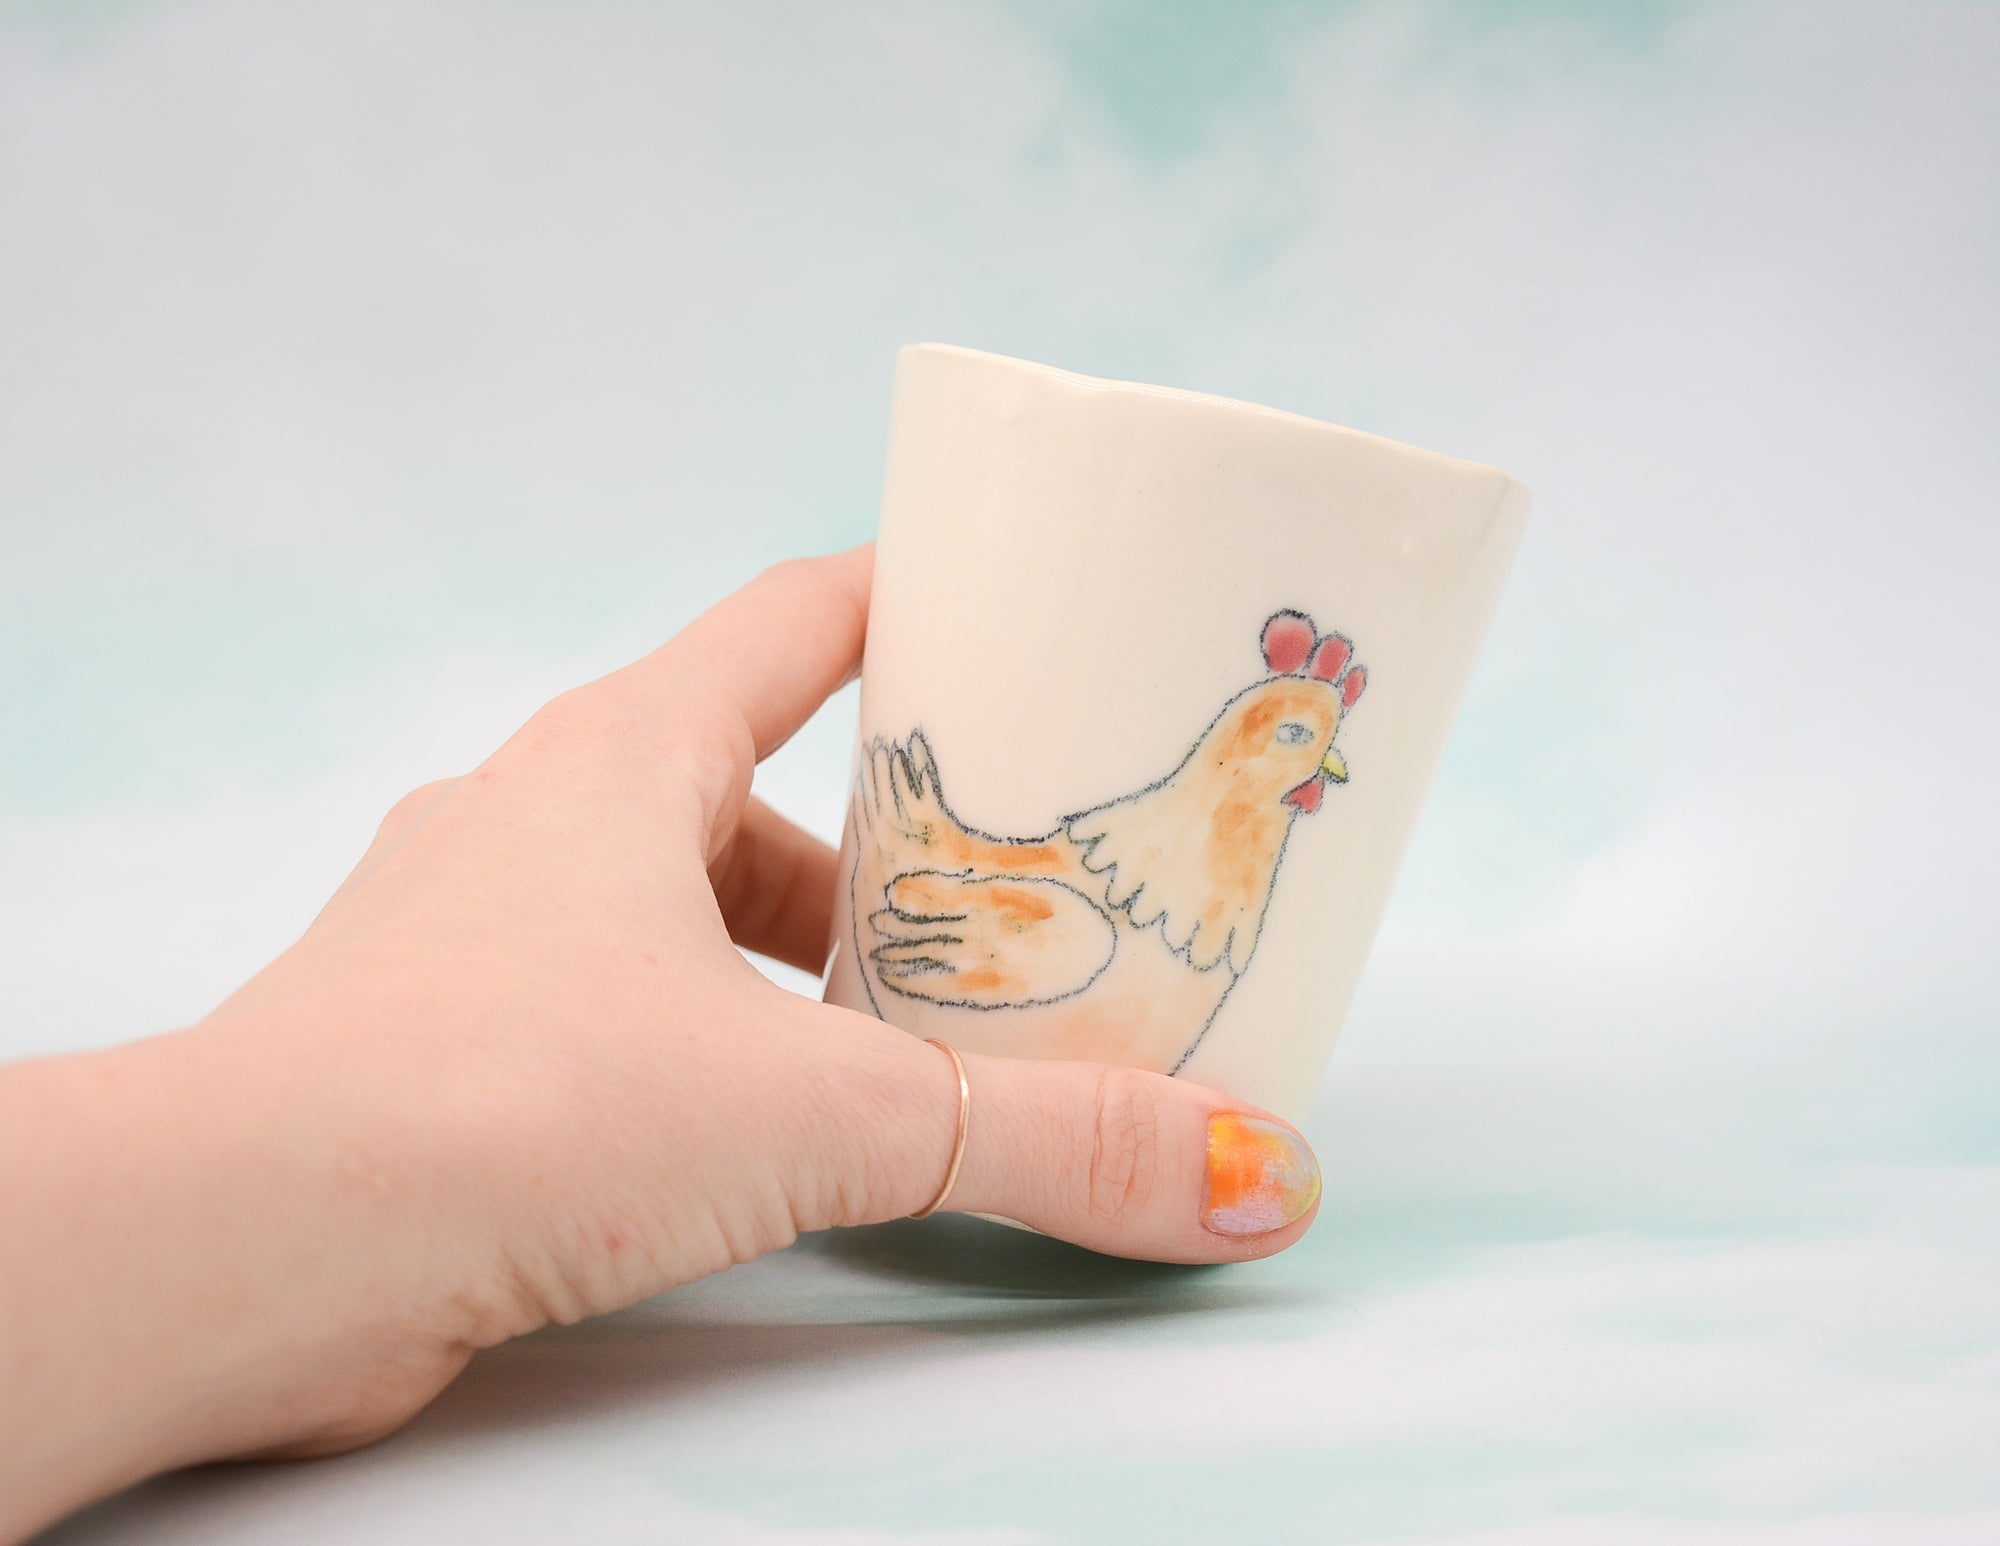 Perry the Chicken Cup